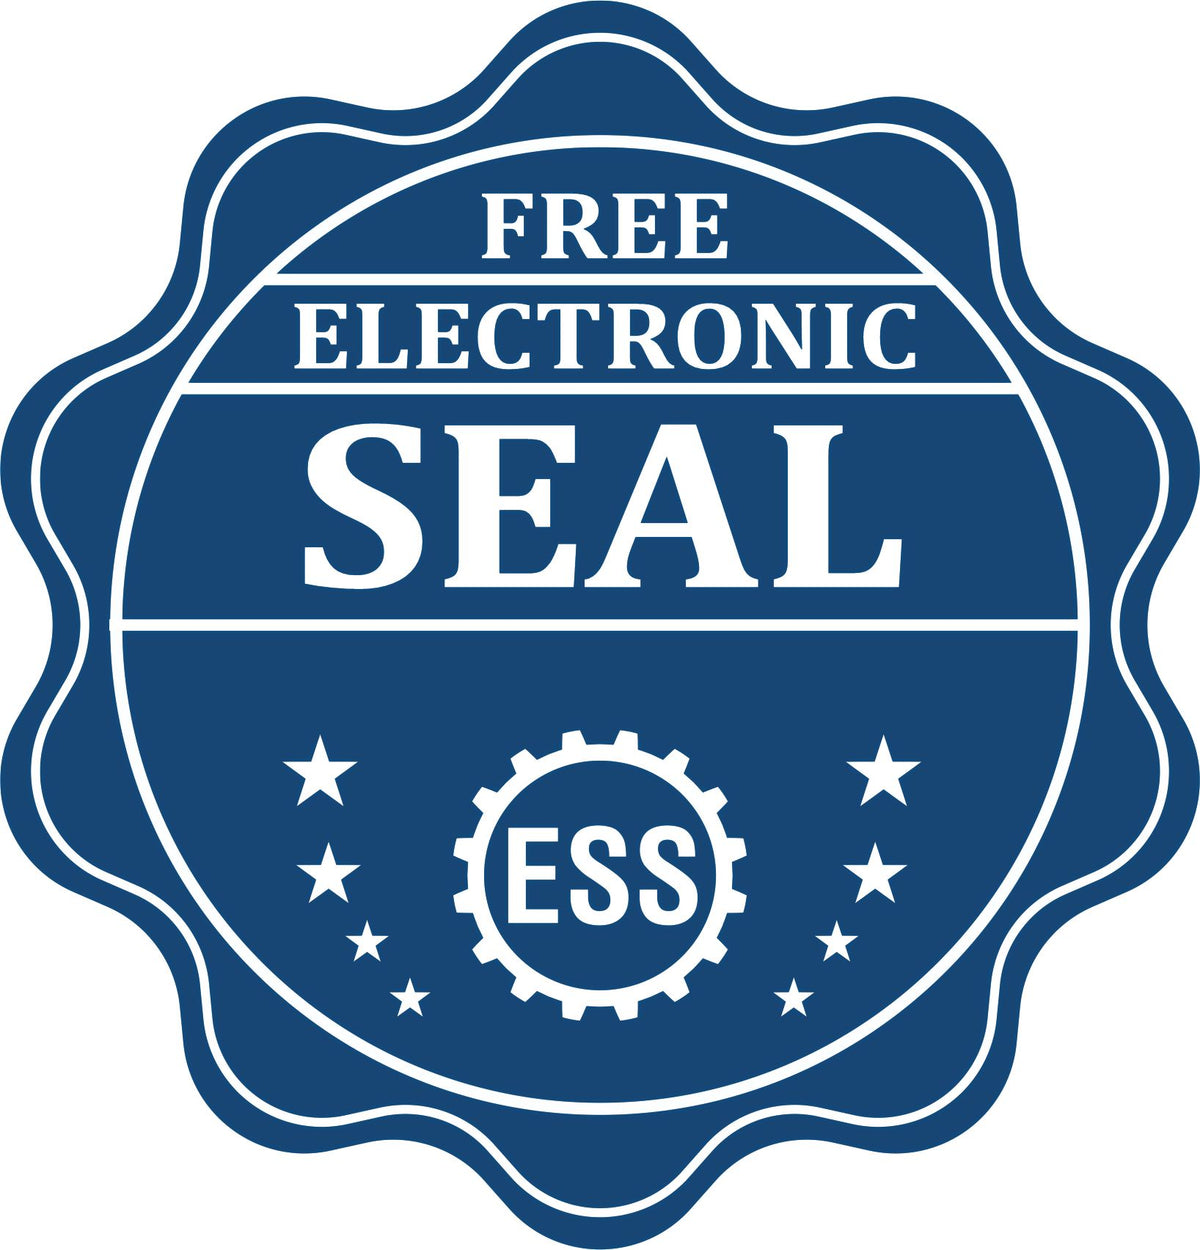 A badge showing a free electronic seal for the Long Reach Indiana PE Seal with stars and the ESS gear on the emblem.